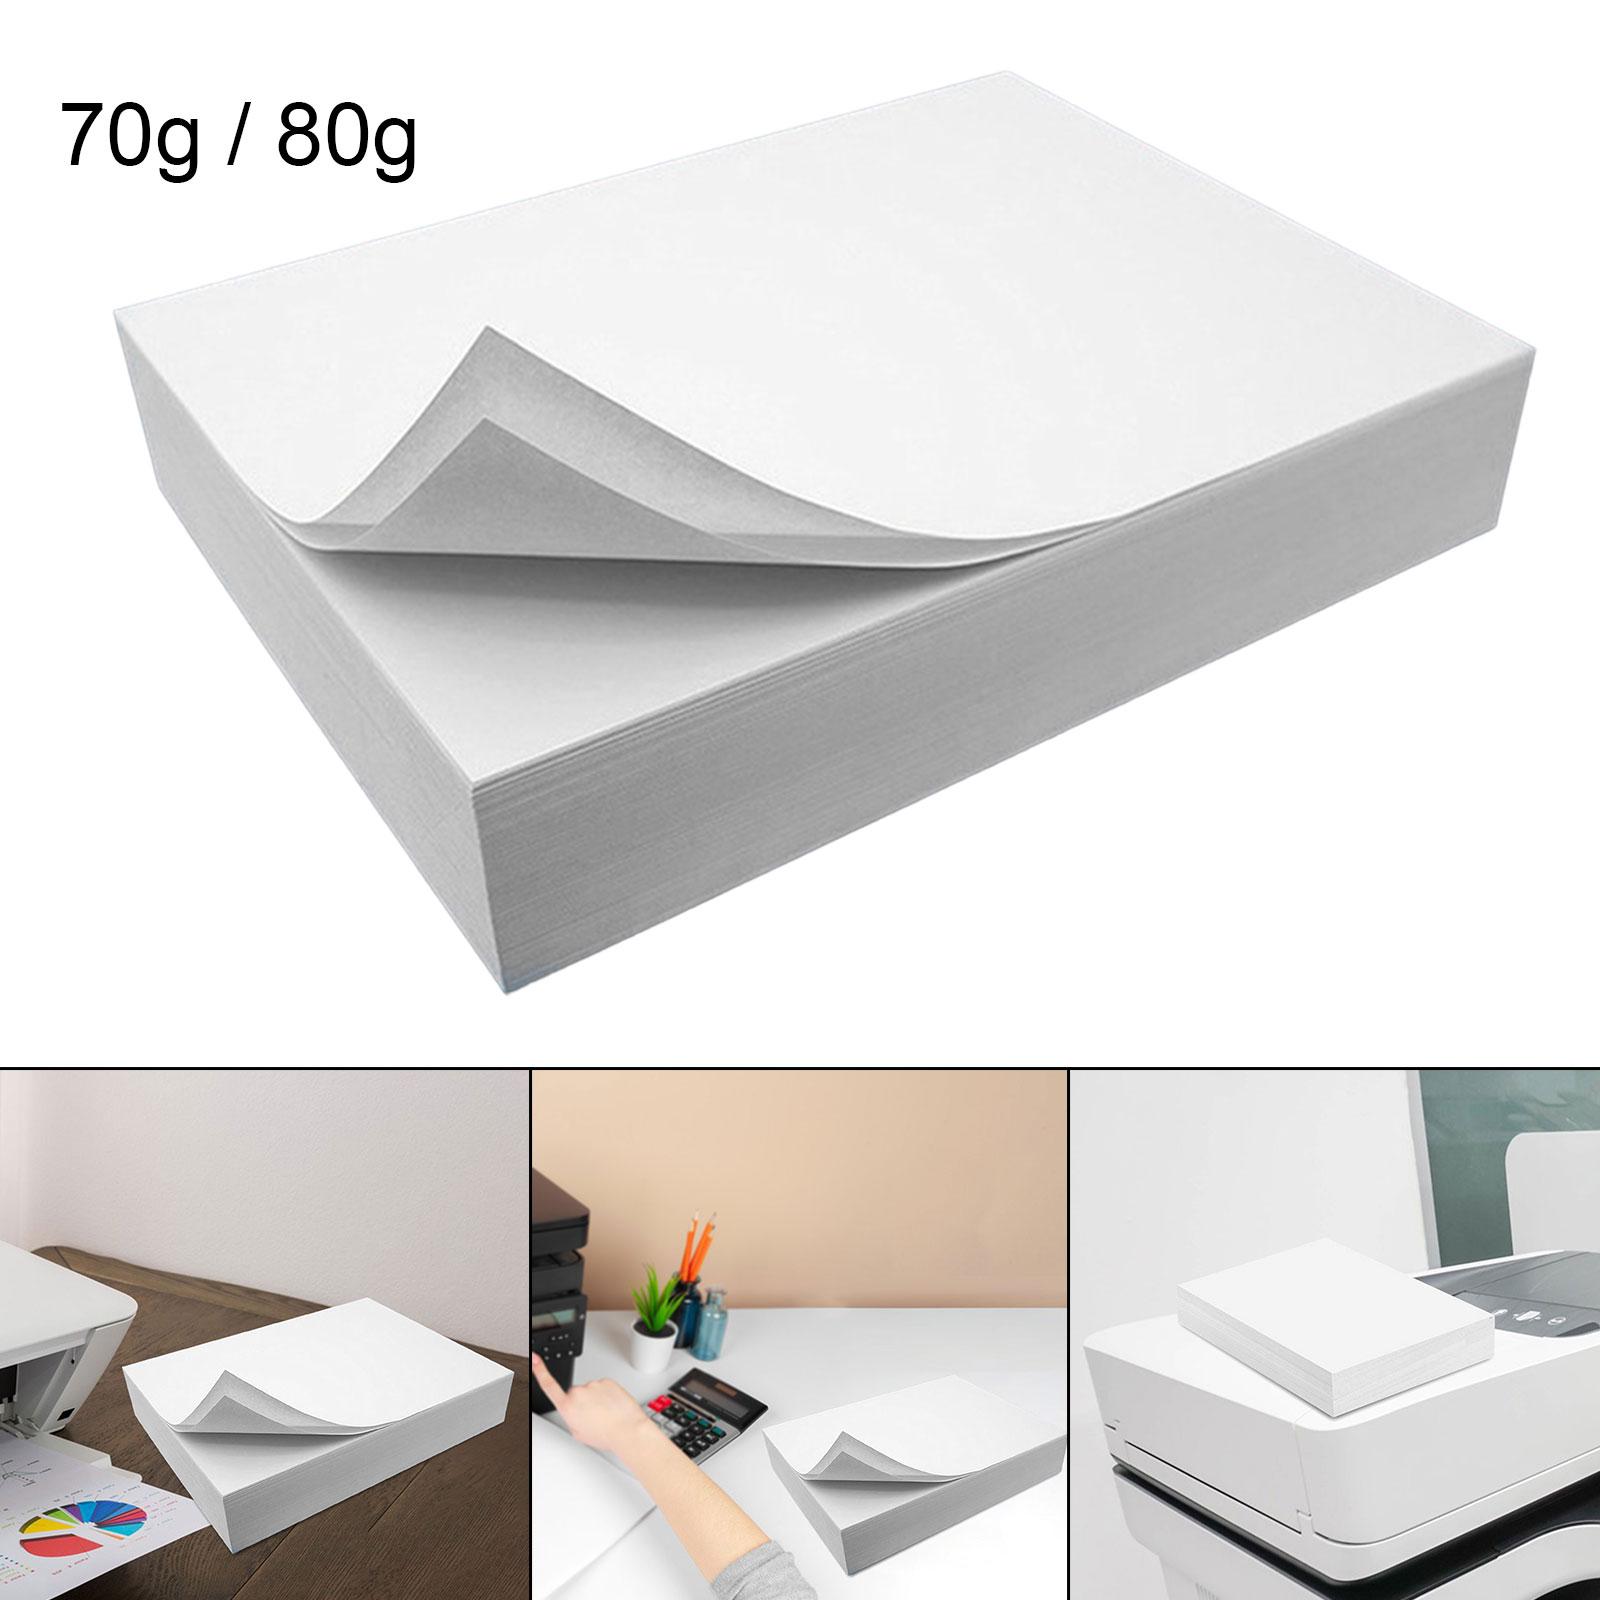 A4 Printing Paper Computer Paper Professional 500 Count Multipurpose Copy Printer Paper for Flyers Communications Reports Memos